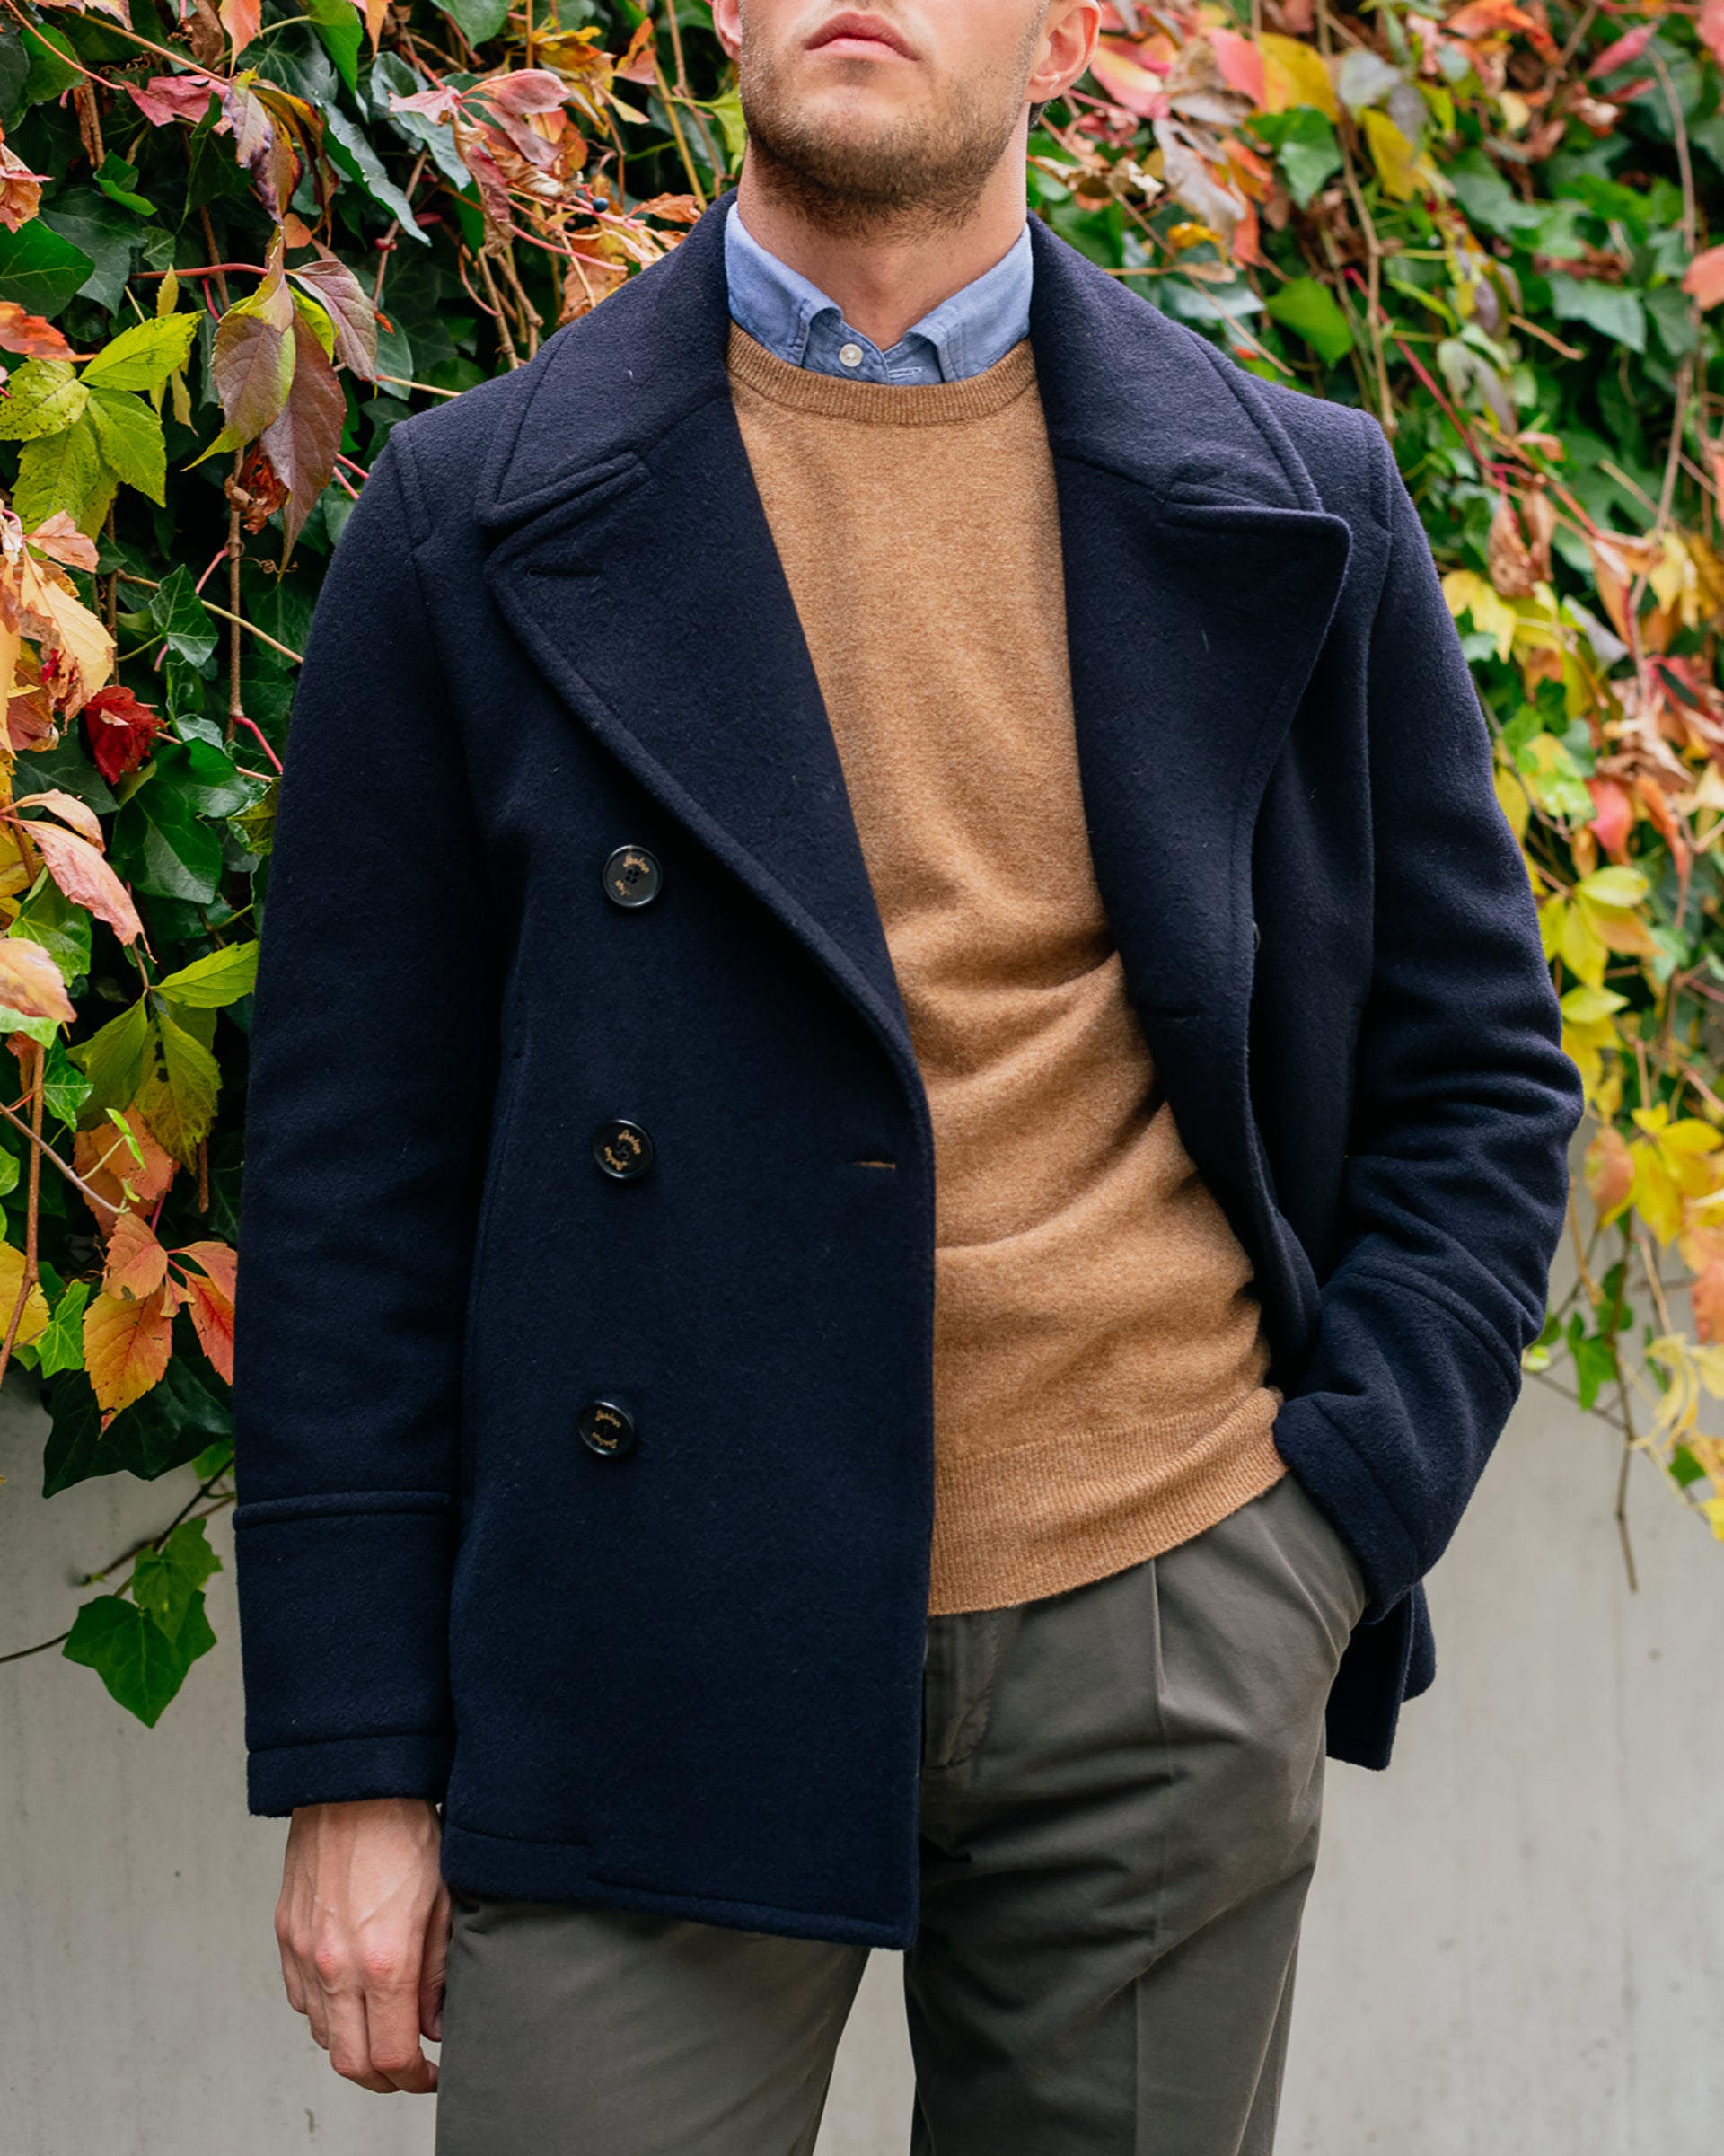 This Season's Investment Outerwear - The Journal | Trunk Clothiers